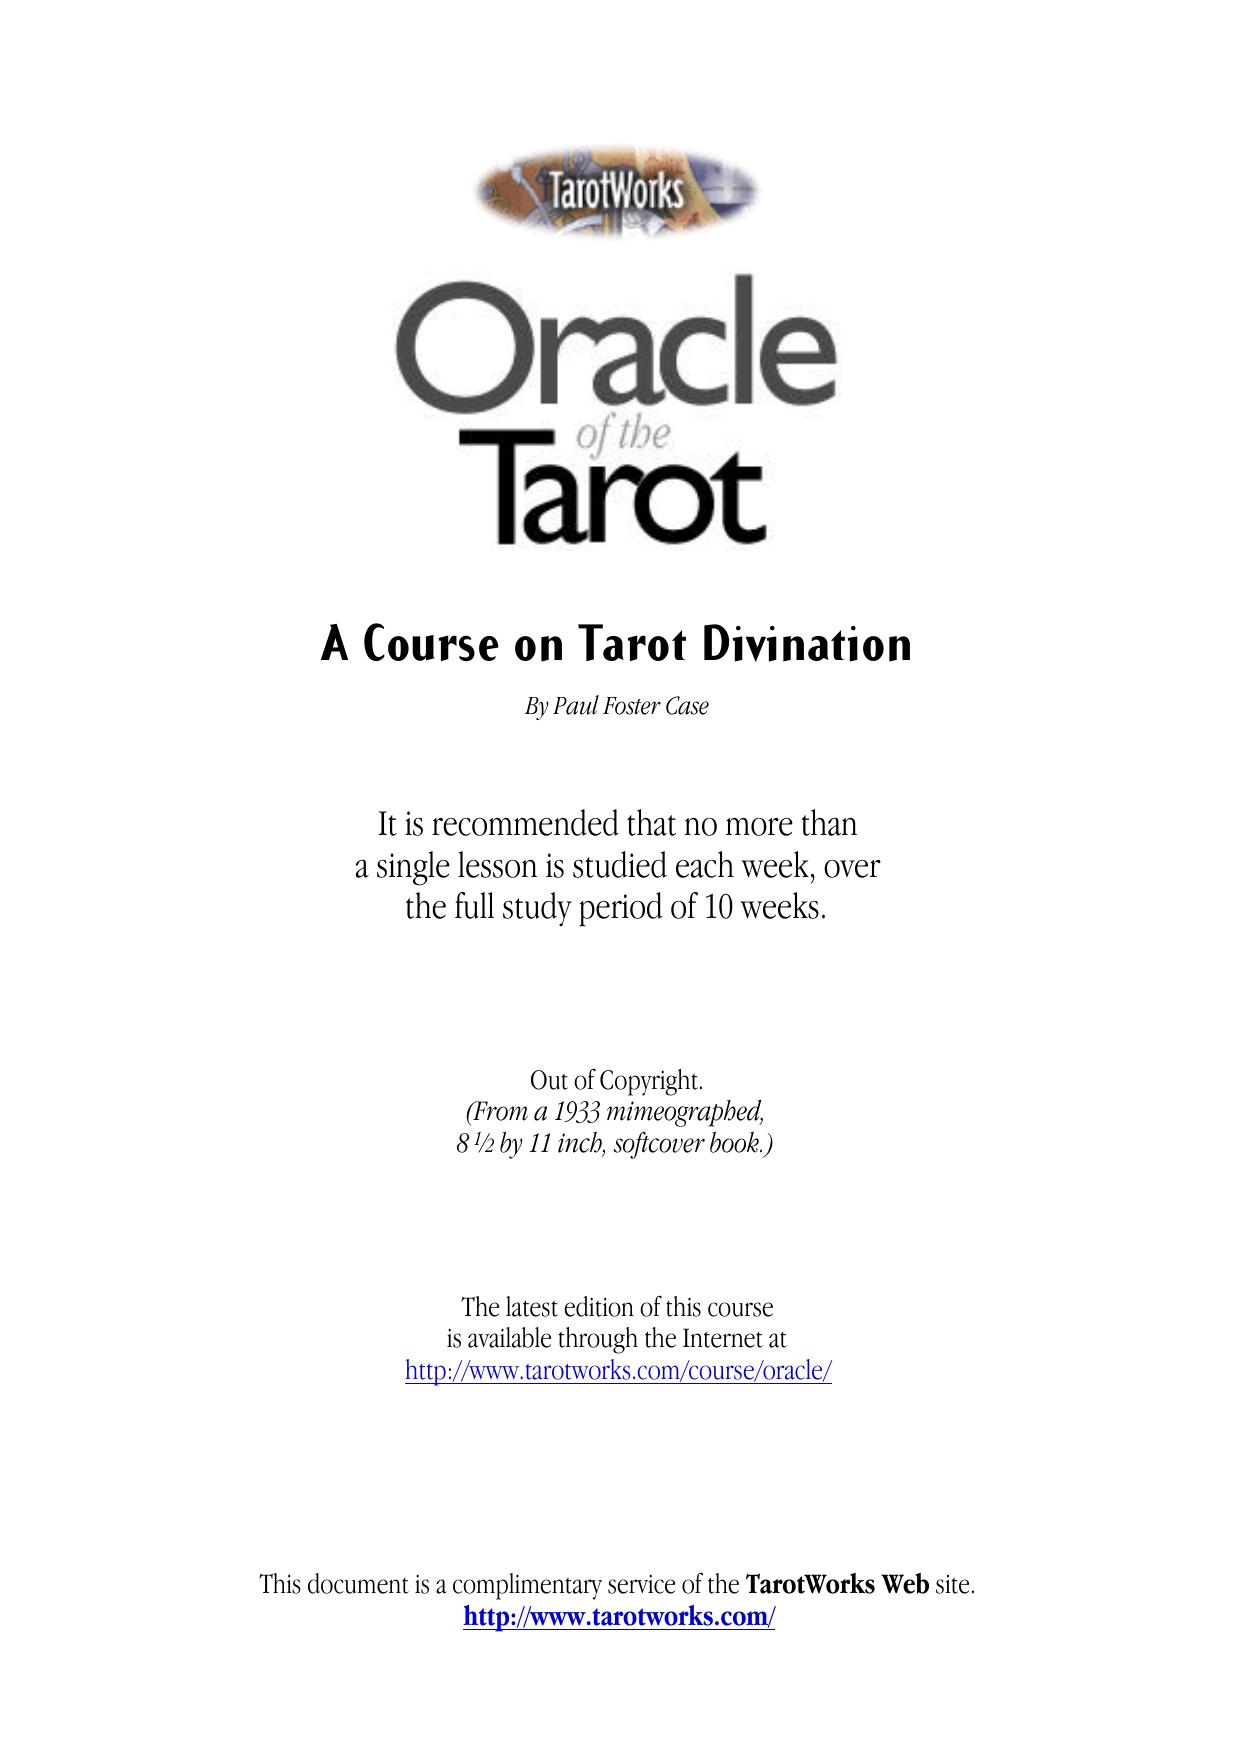 The Oracle of the Tarot